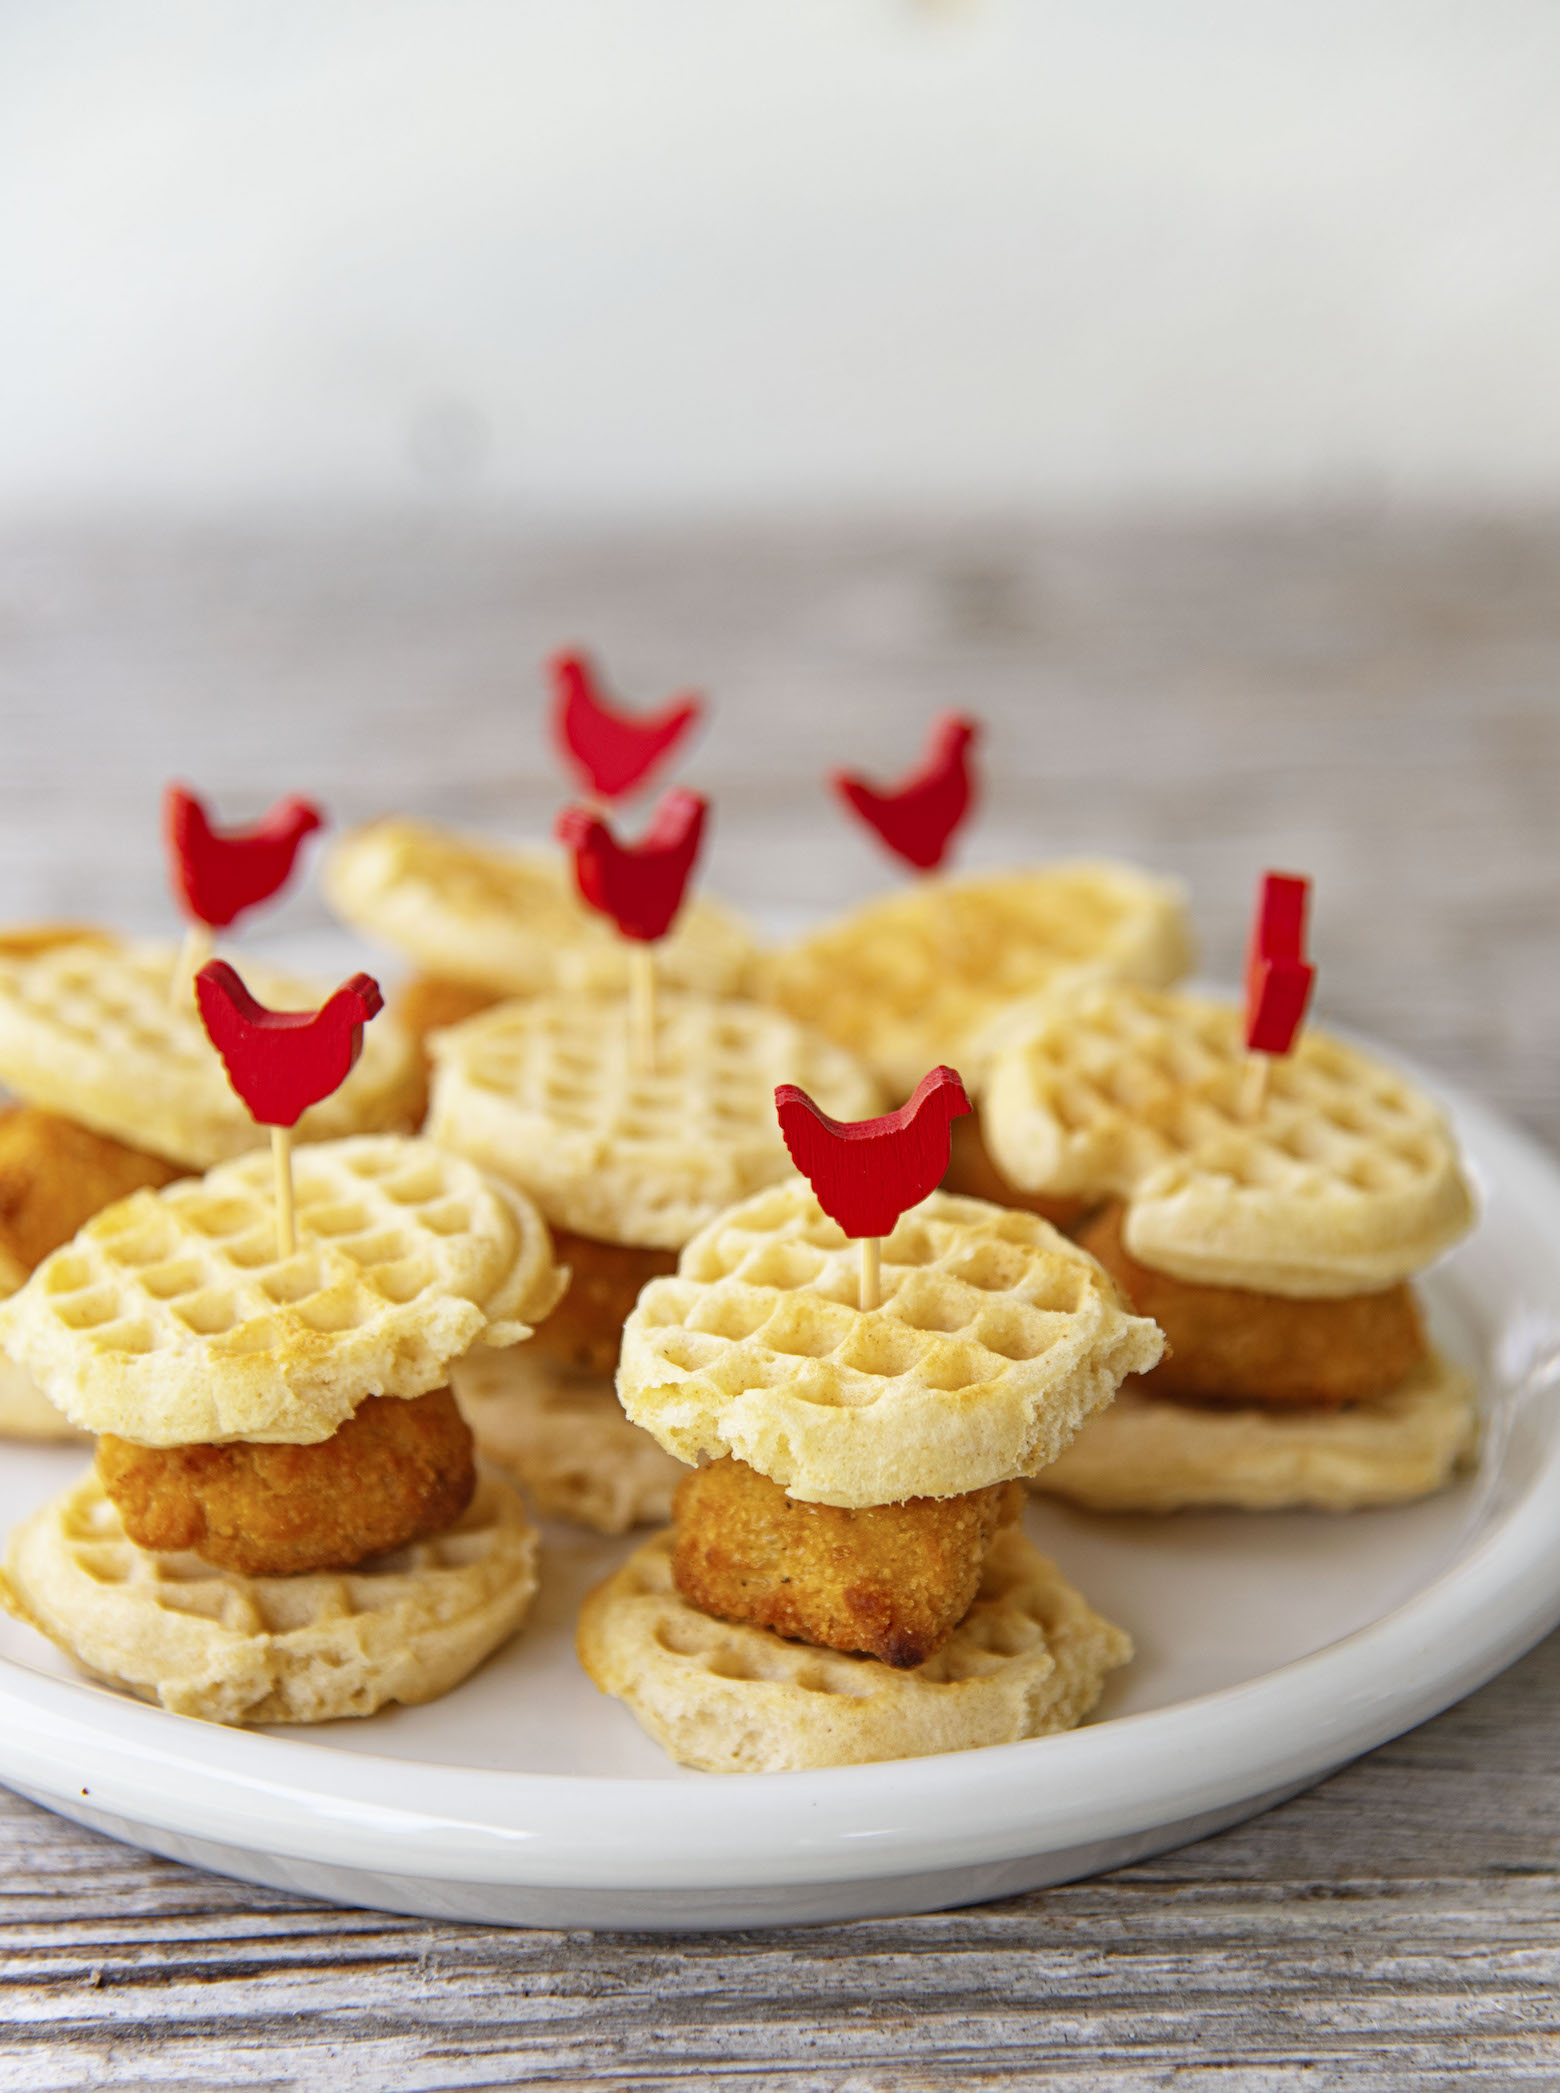 Plate full of Mini Chick’n and Waffles